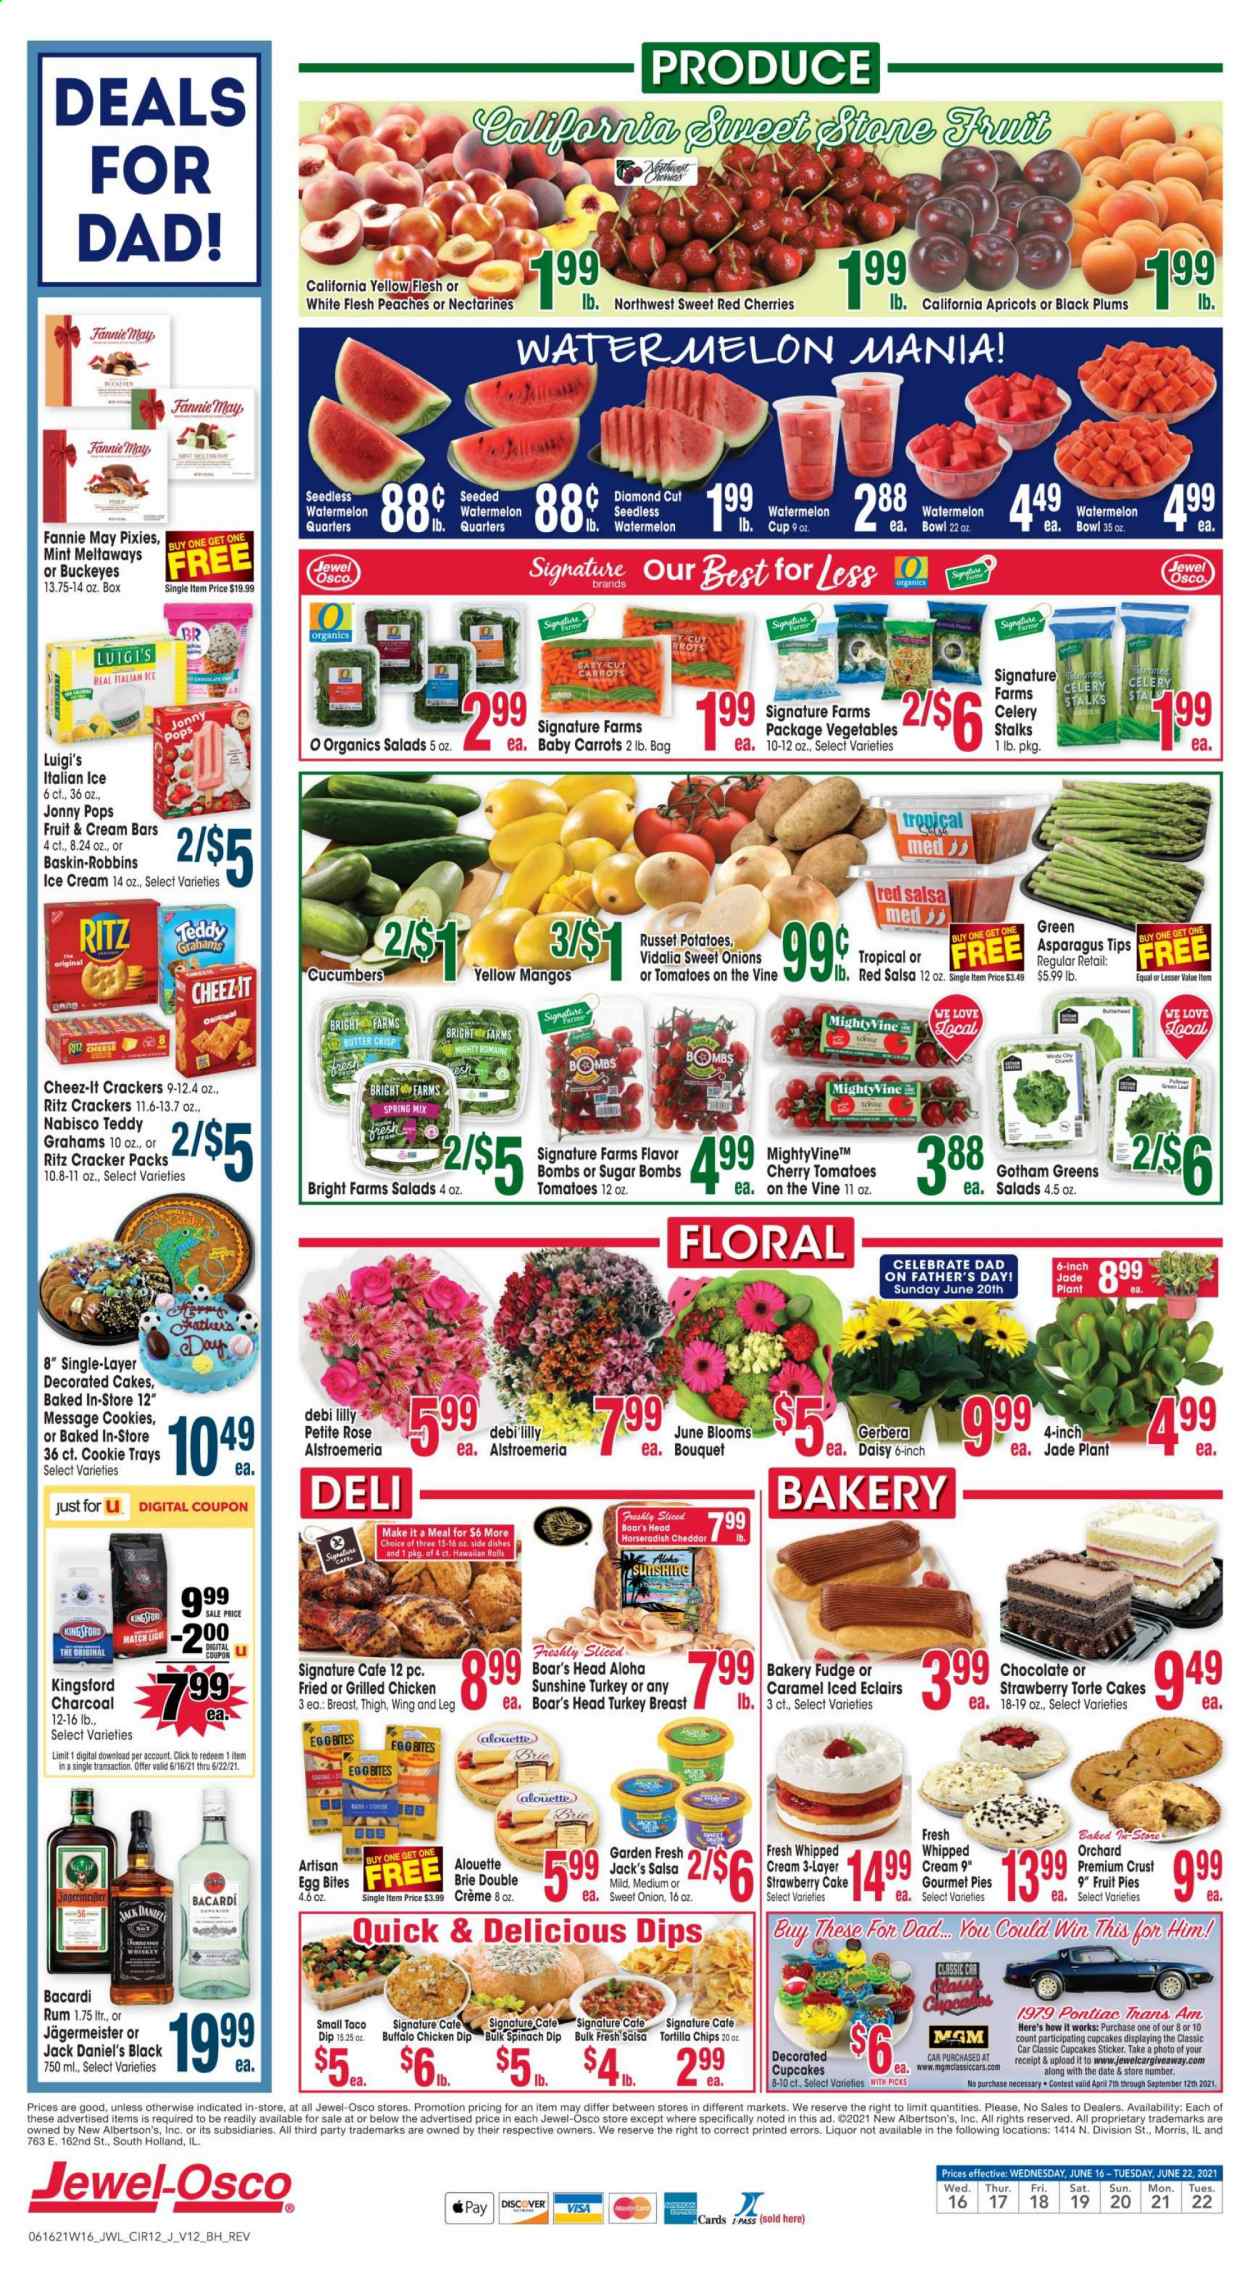 thumbnail - Jewel Osco Flyer - 06/16/2021 - 06/22/2021 - Sales products - plums, cake, cupcake, asparagus, carrots, celery, cucumber, russet potatoes, tomatoes, horseradish, potatoes, sleeved celery, mango, watermelon, cherries, apricots, Jack Daniel's, cheese, brie, eggs, butter, Sunshine, whipped cream, dip, spinach dip, ice cream, cookies, fudge, crackers, RITZ, tortilla chips, chips, Cheez-It, sugar, salsa, wine, Bacardi, rum, whiskey, Jägermeister, whisky, turkey breast, cup, sticker, bouquet, gerbera, rose, Alstroemeria, charcoal, nectarines, black plums, peaches. Page 12.